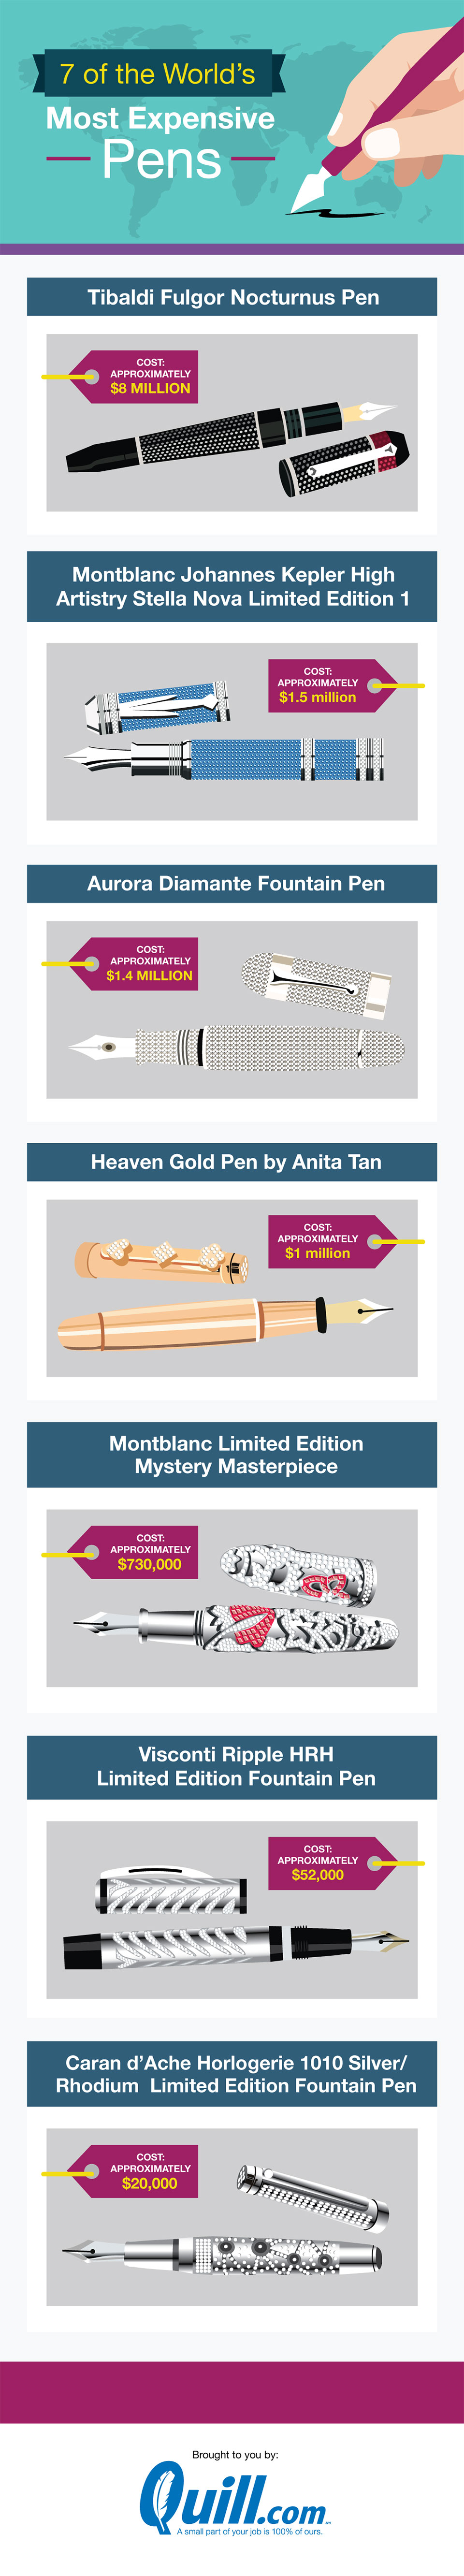 7 Most Expensive Pens